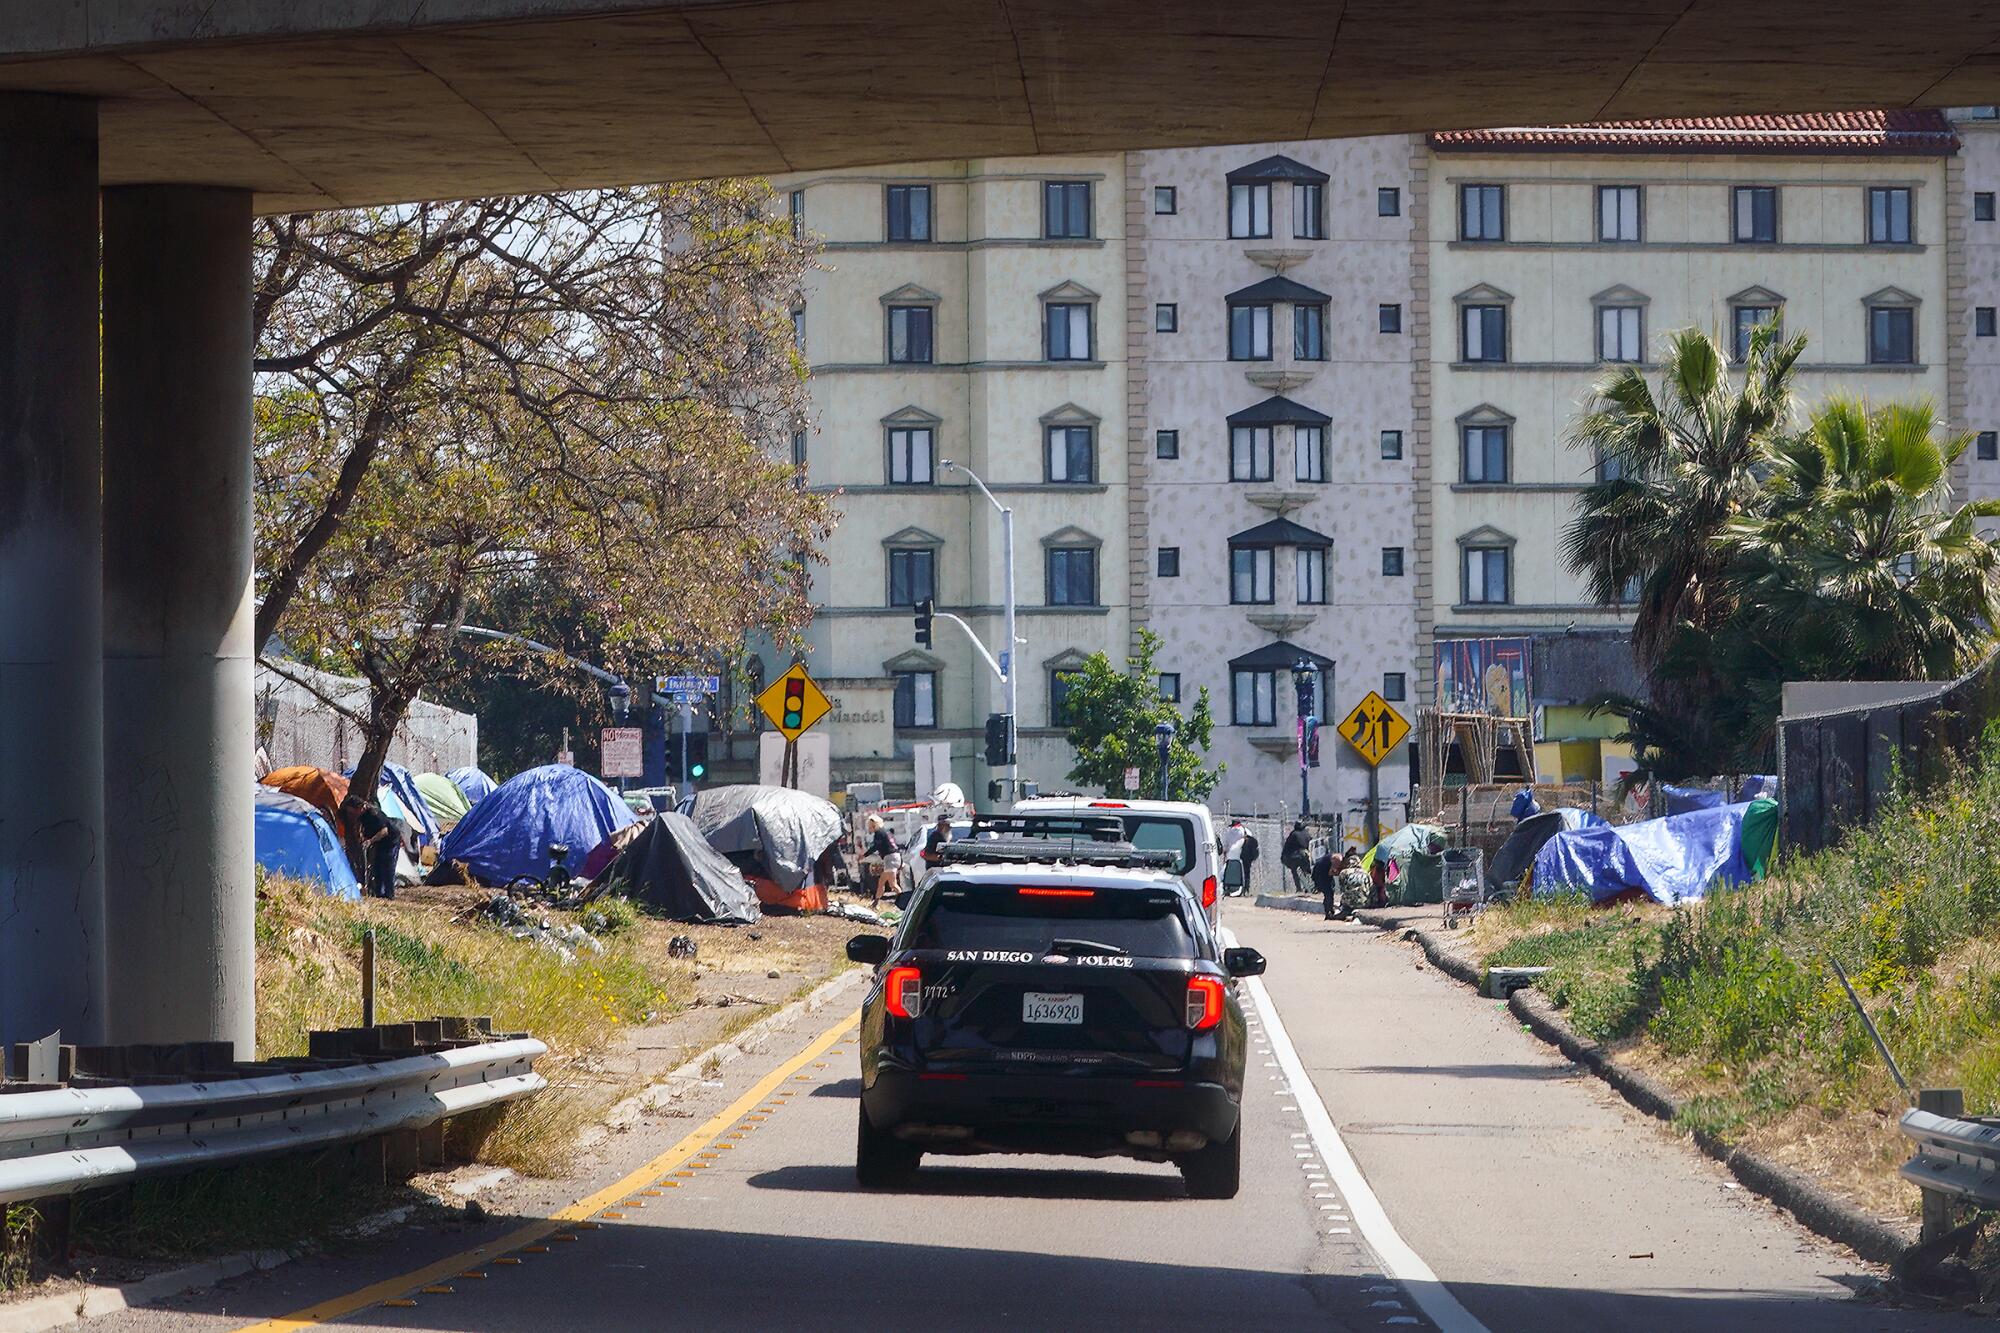 An encampment near the Imperial Avenue offramp on southbound Interstate 5 in San Diego.